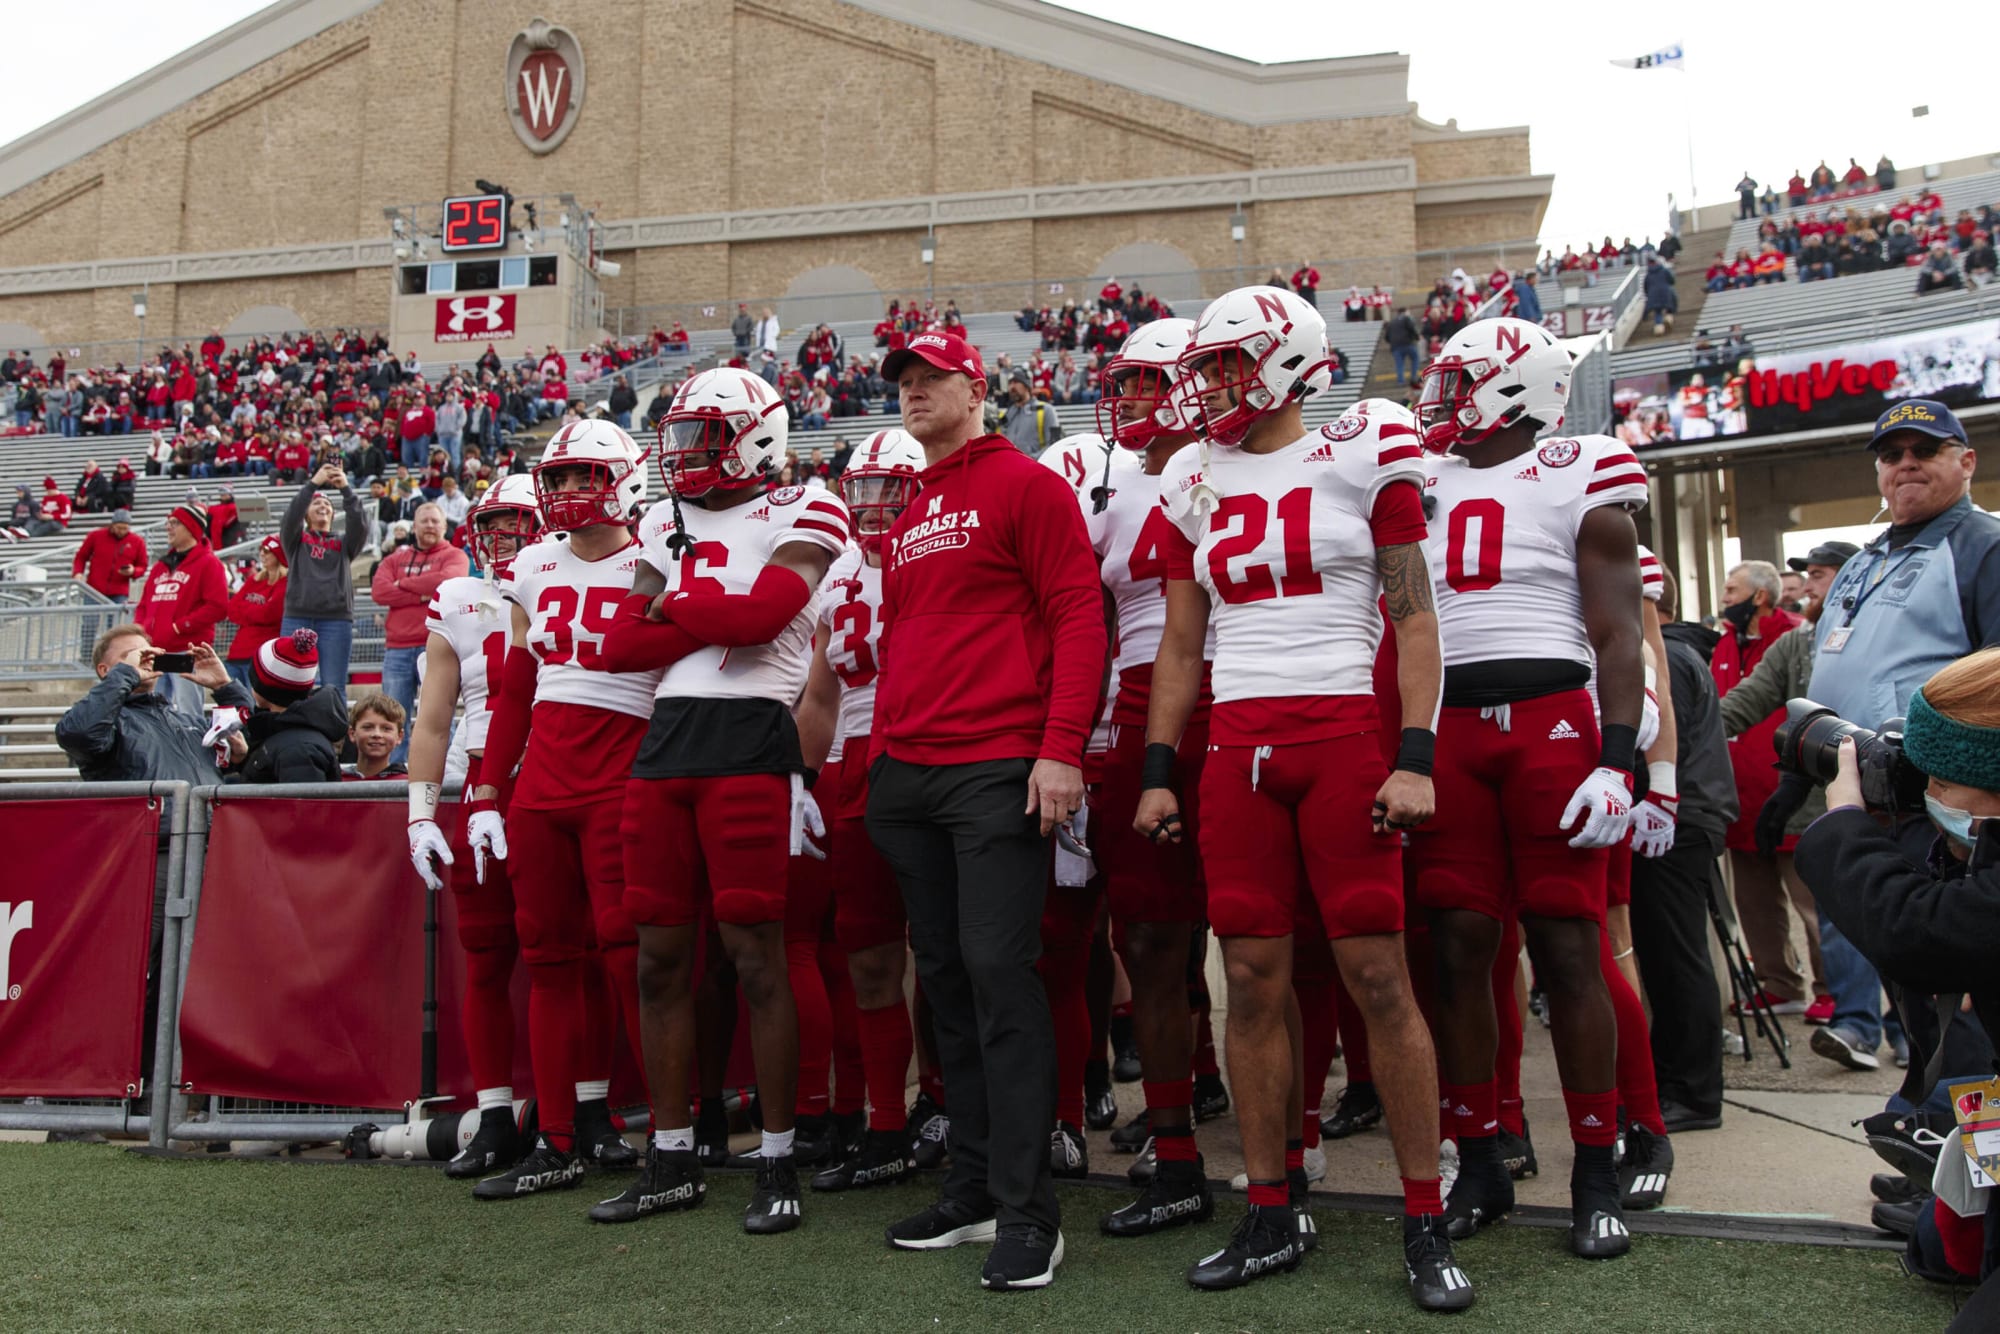 Huskers Football Schedule 2022 2022 Nebraska Football Schedule And Way-Too-Early Predictions